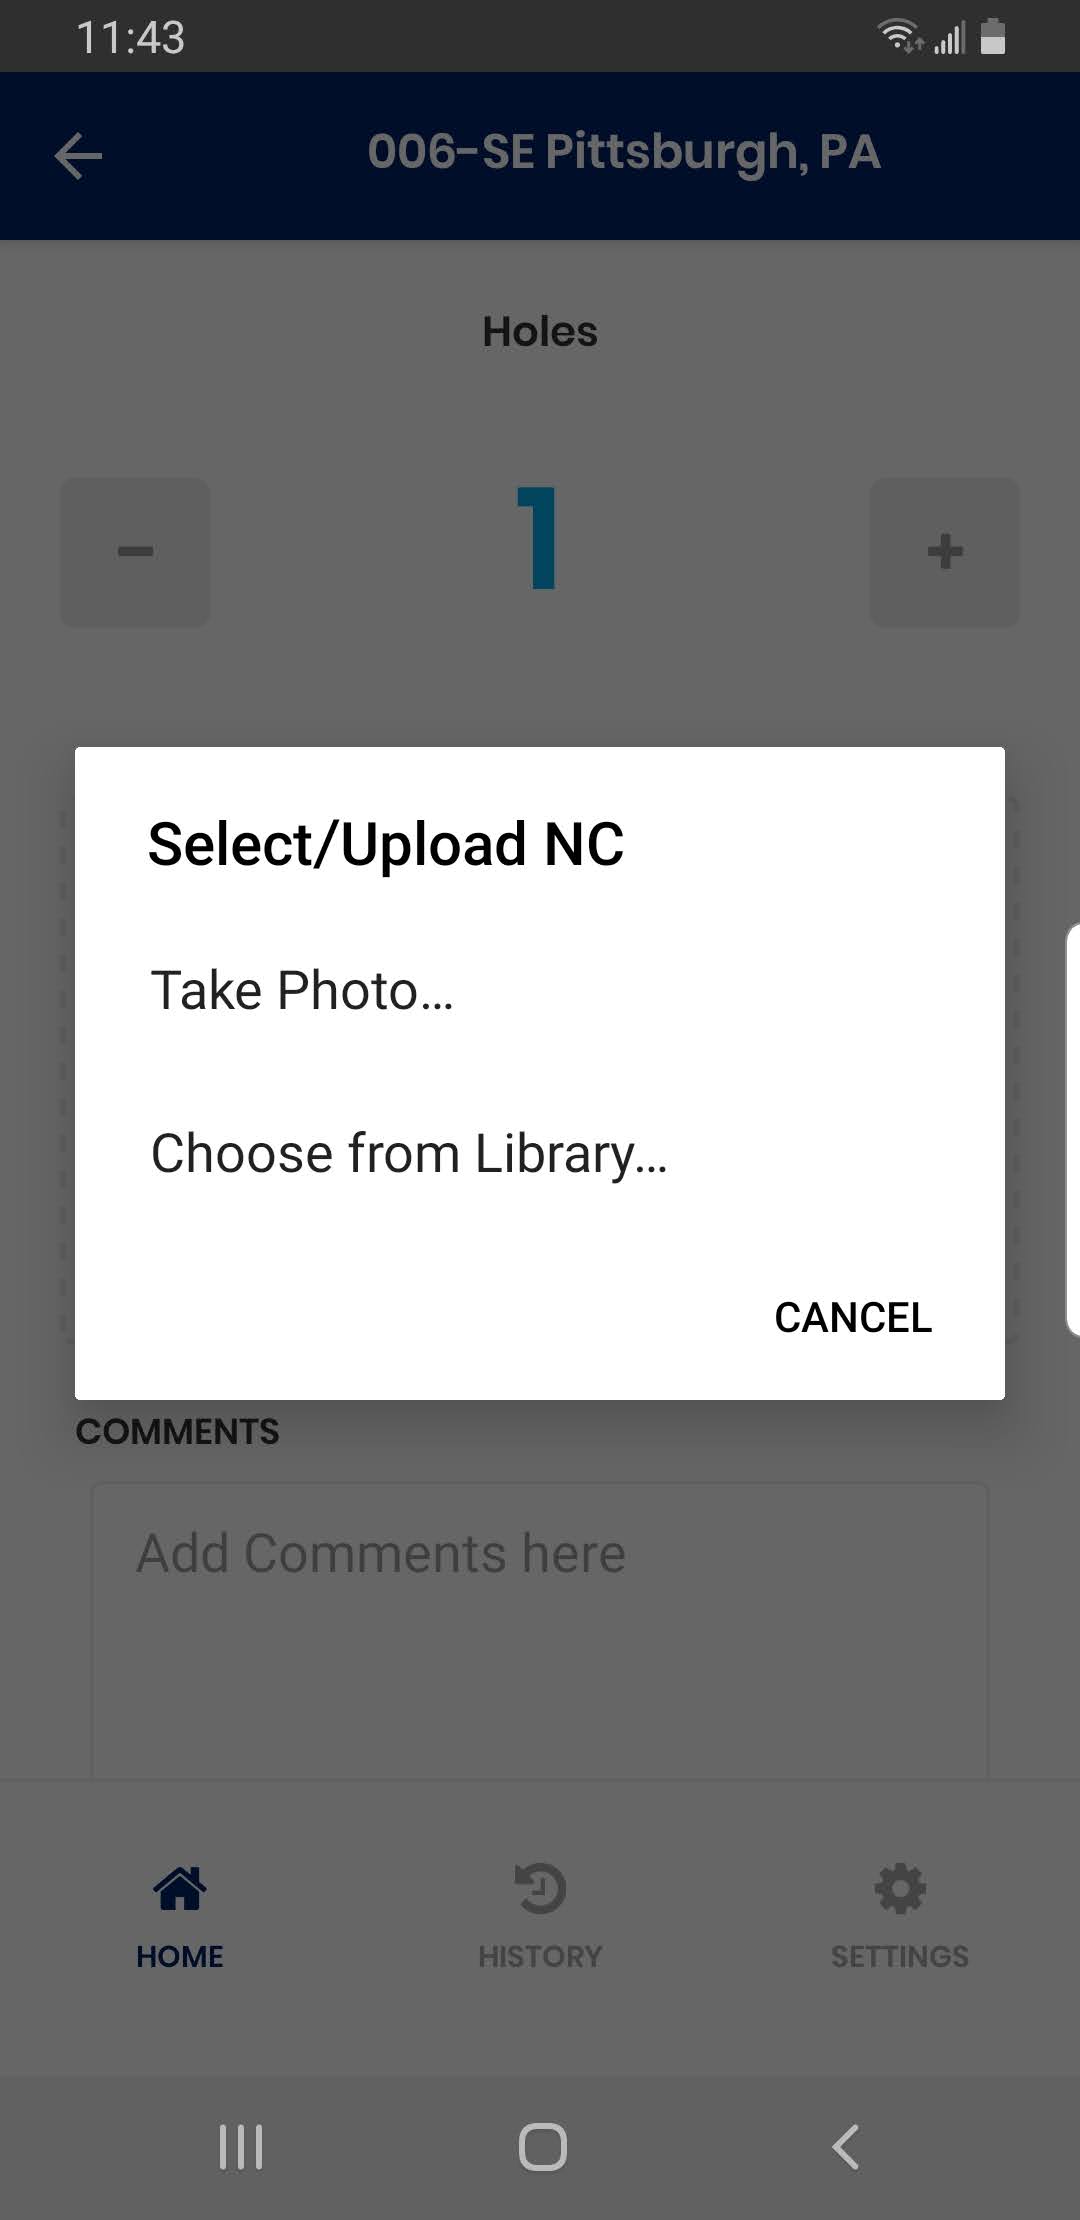 7.	Click on Upload Or Capture Photo. To take picture using Phone Camera, select “Take Photo…”. To utilize previously taken picture, select “Choose from Library…”. 